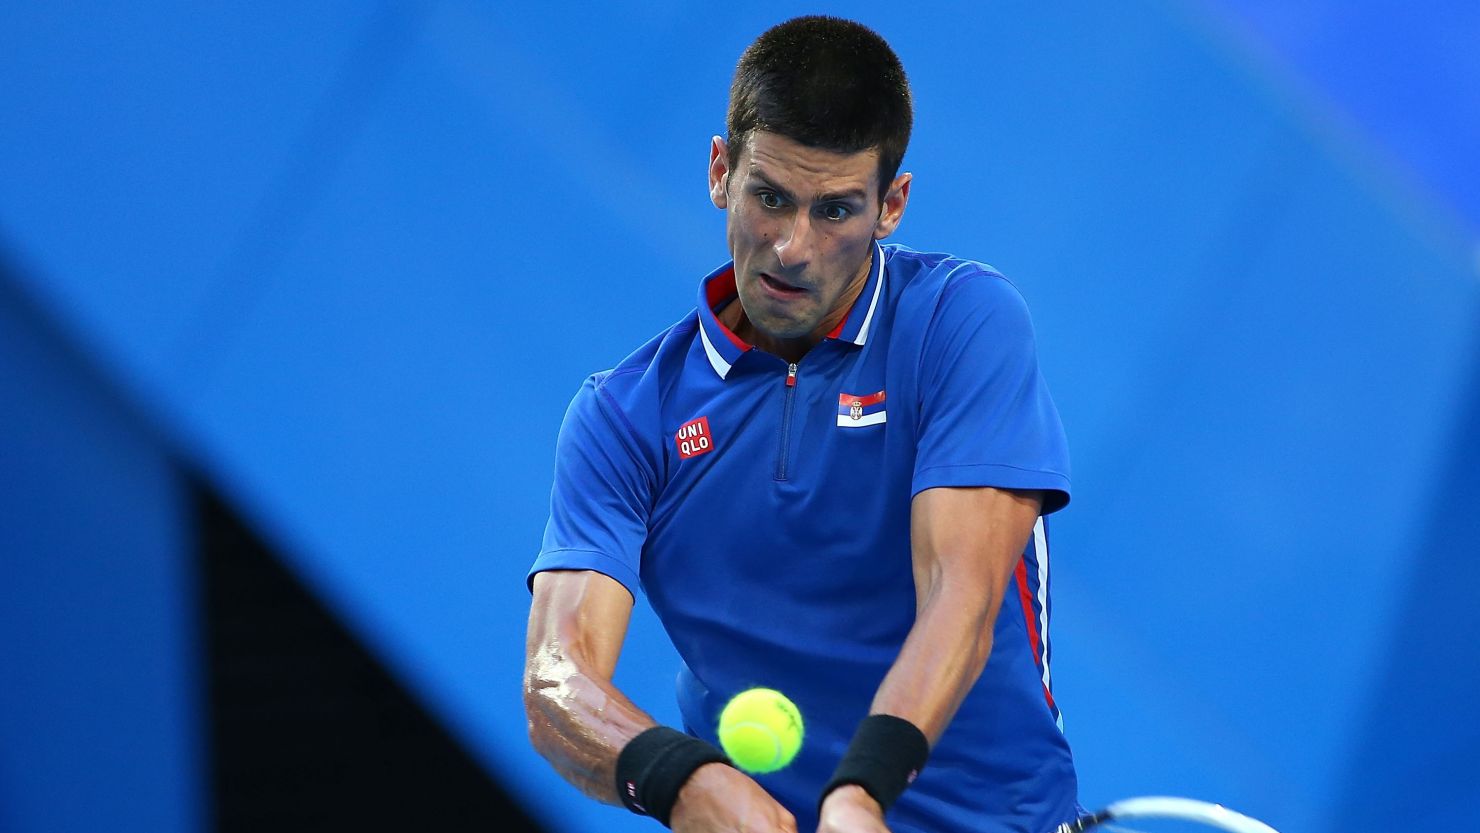 World number one Novak Djokovic slipped to a surprise defeat against Australia's Bernard Tomic at the Hopman Cup.